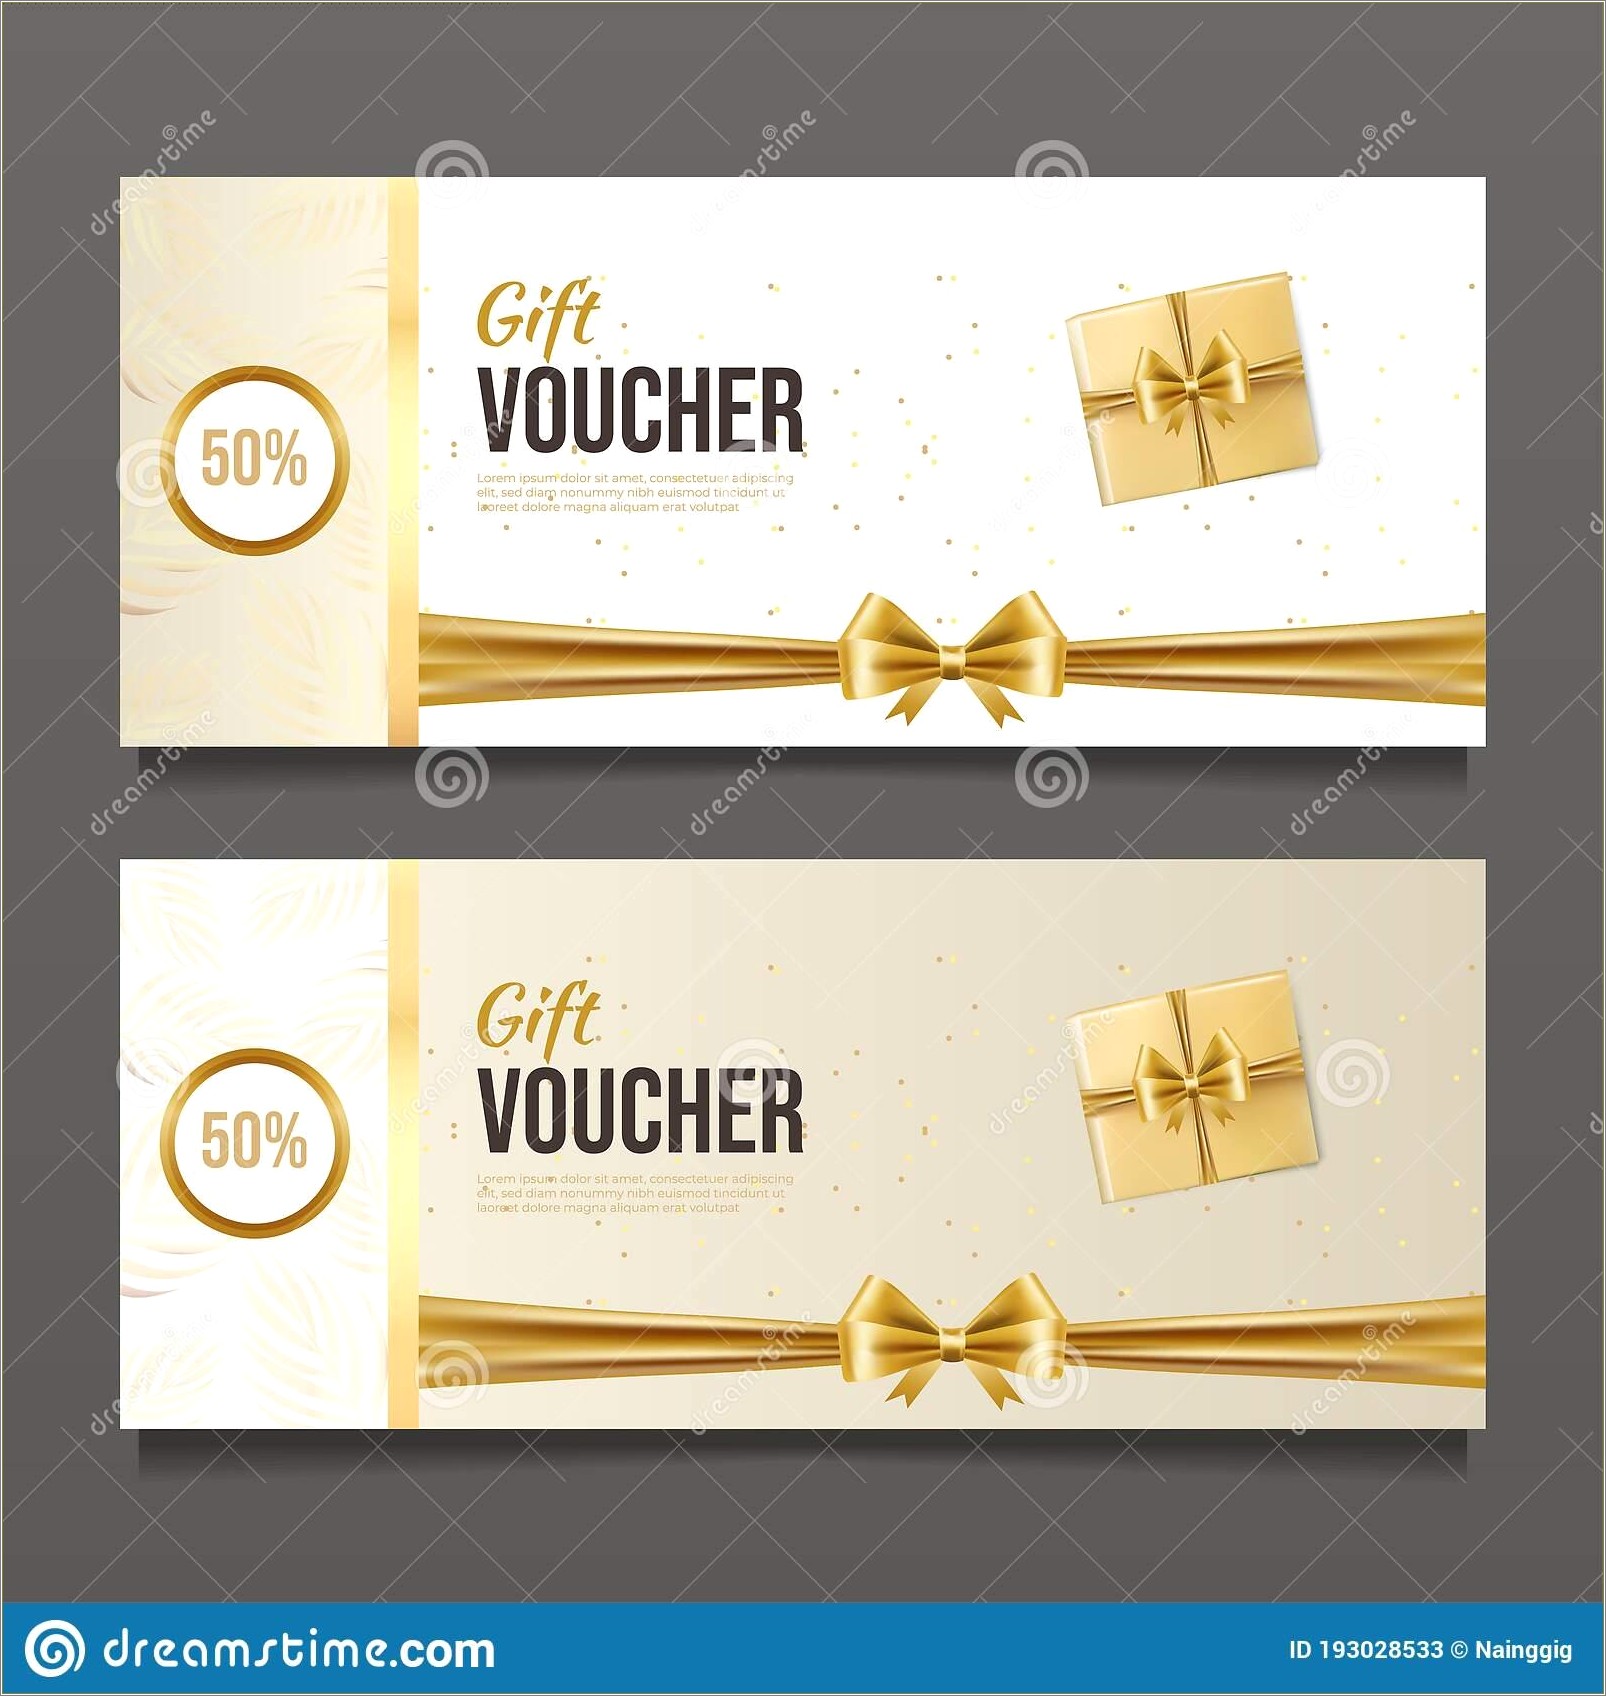 Gift Certificate Template With Wood Desgin Free